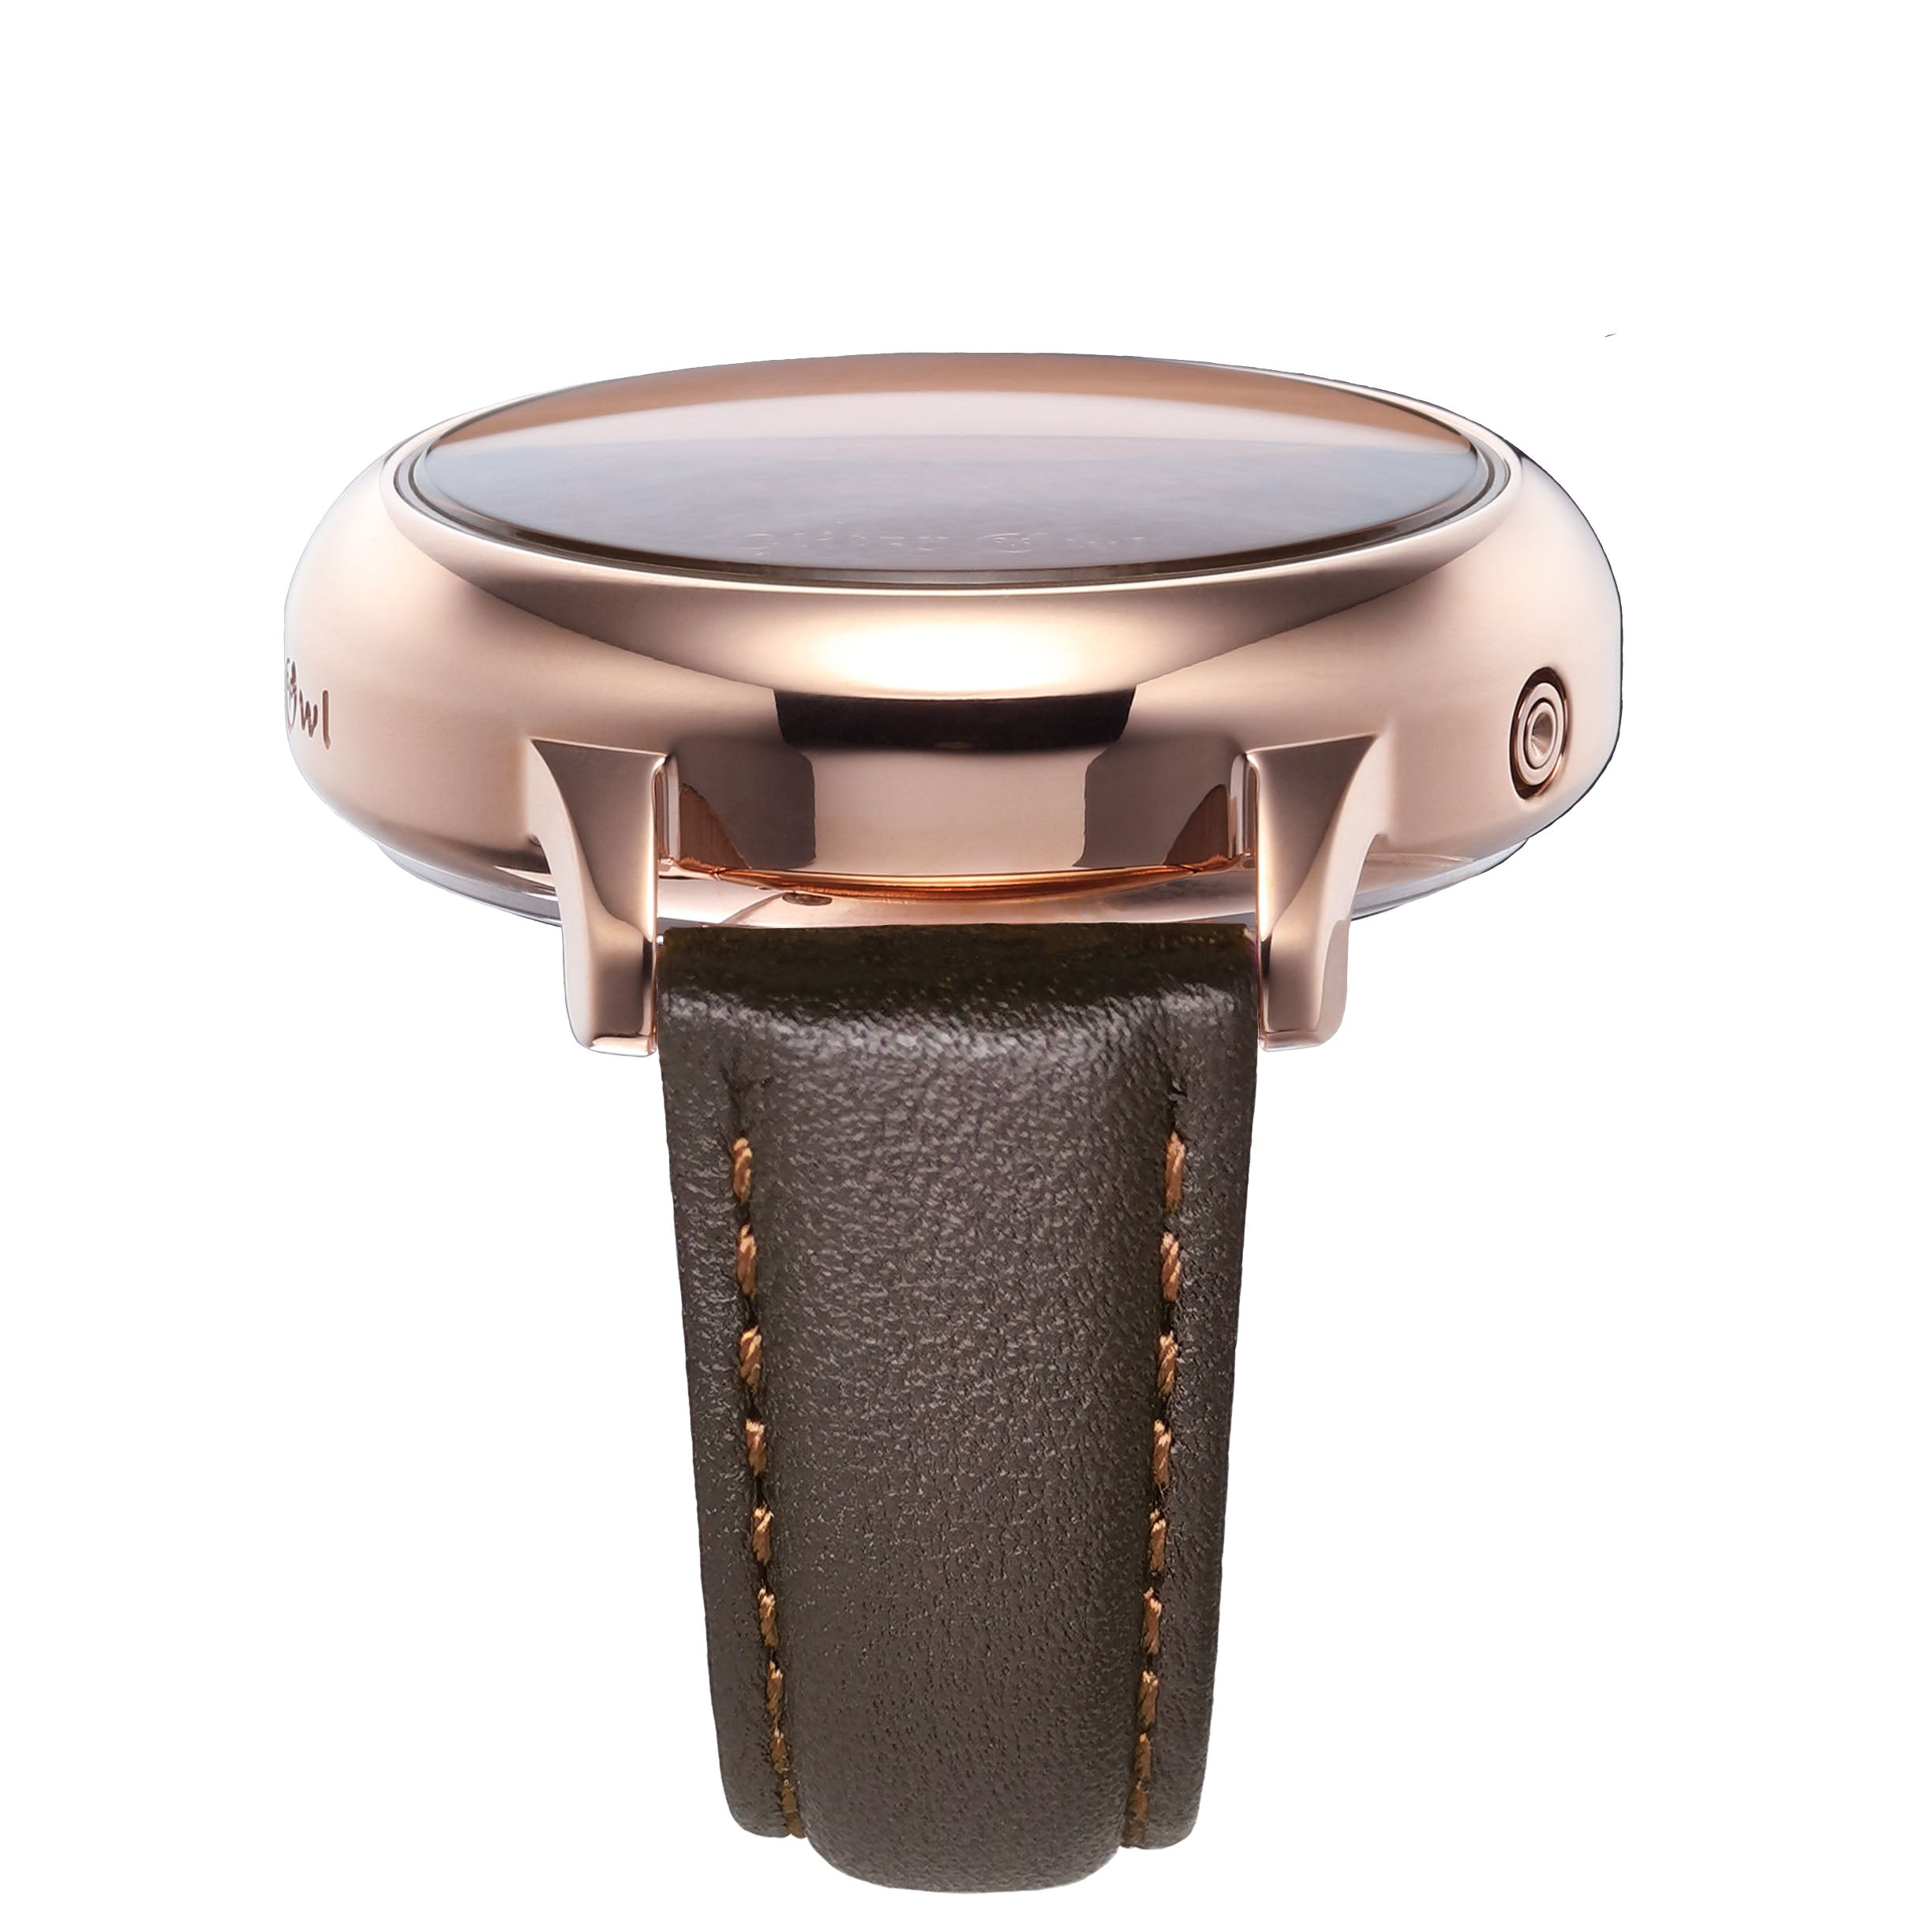 THE BUBBLE LED Rose Gold-Tone Stainless Steel Brown Leather Watch